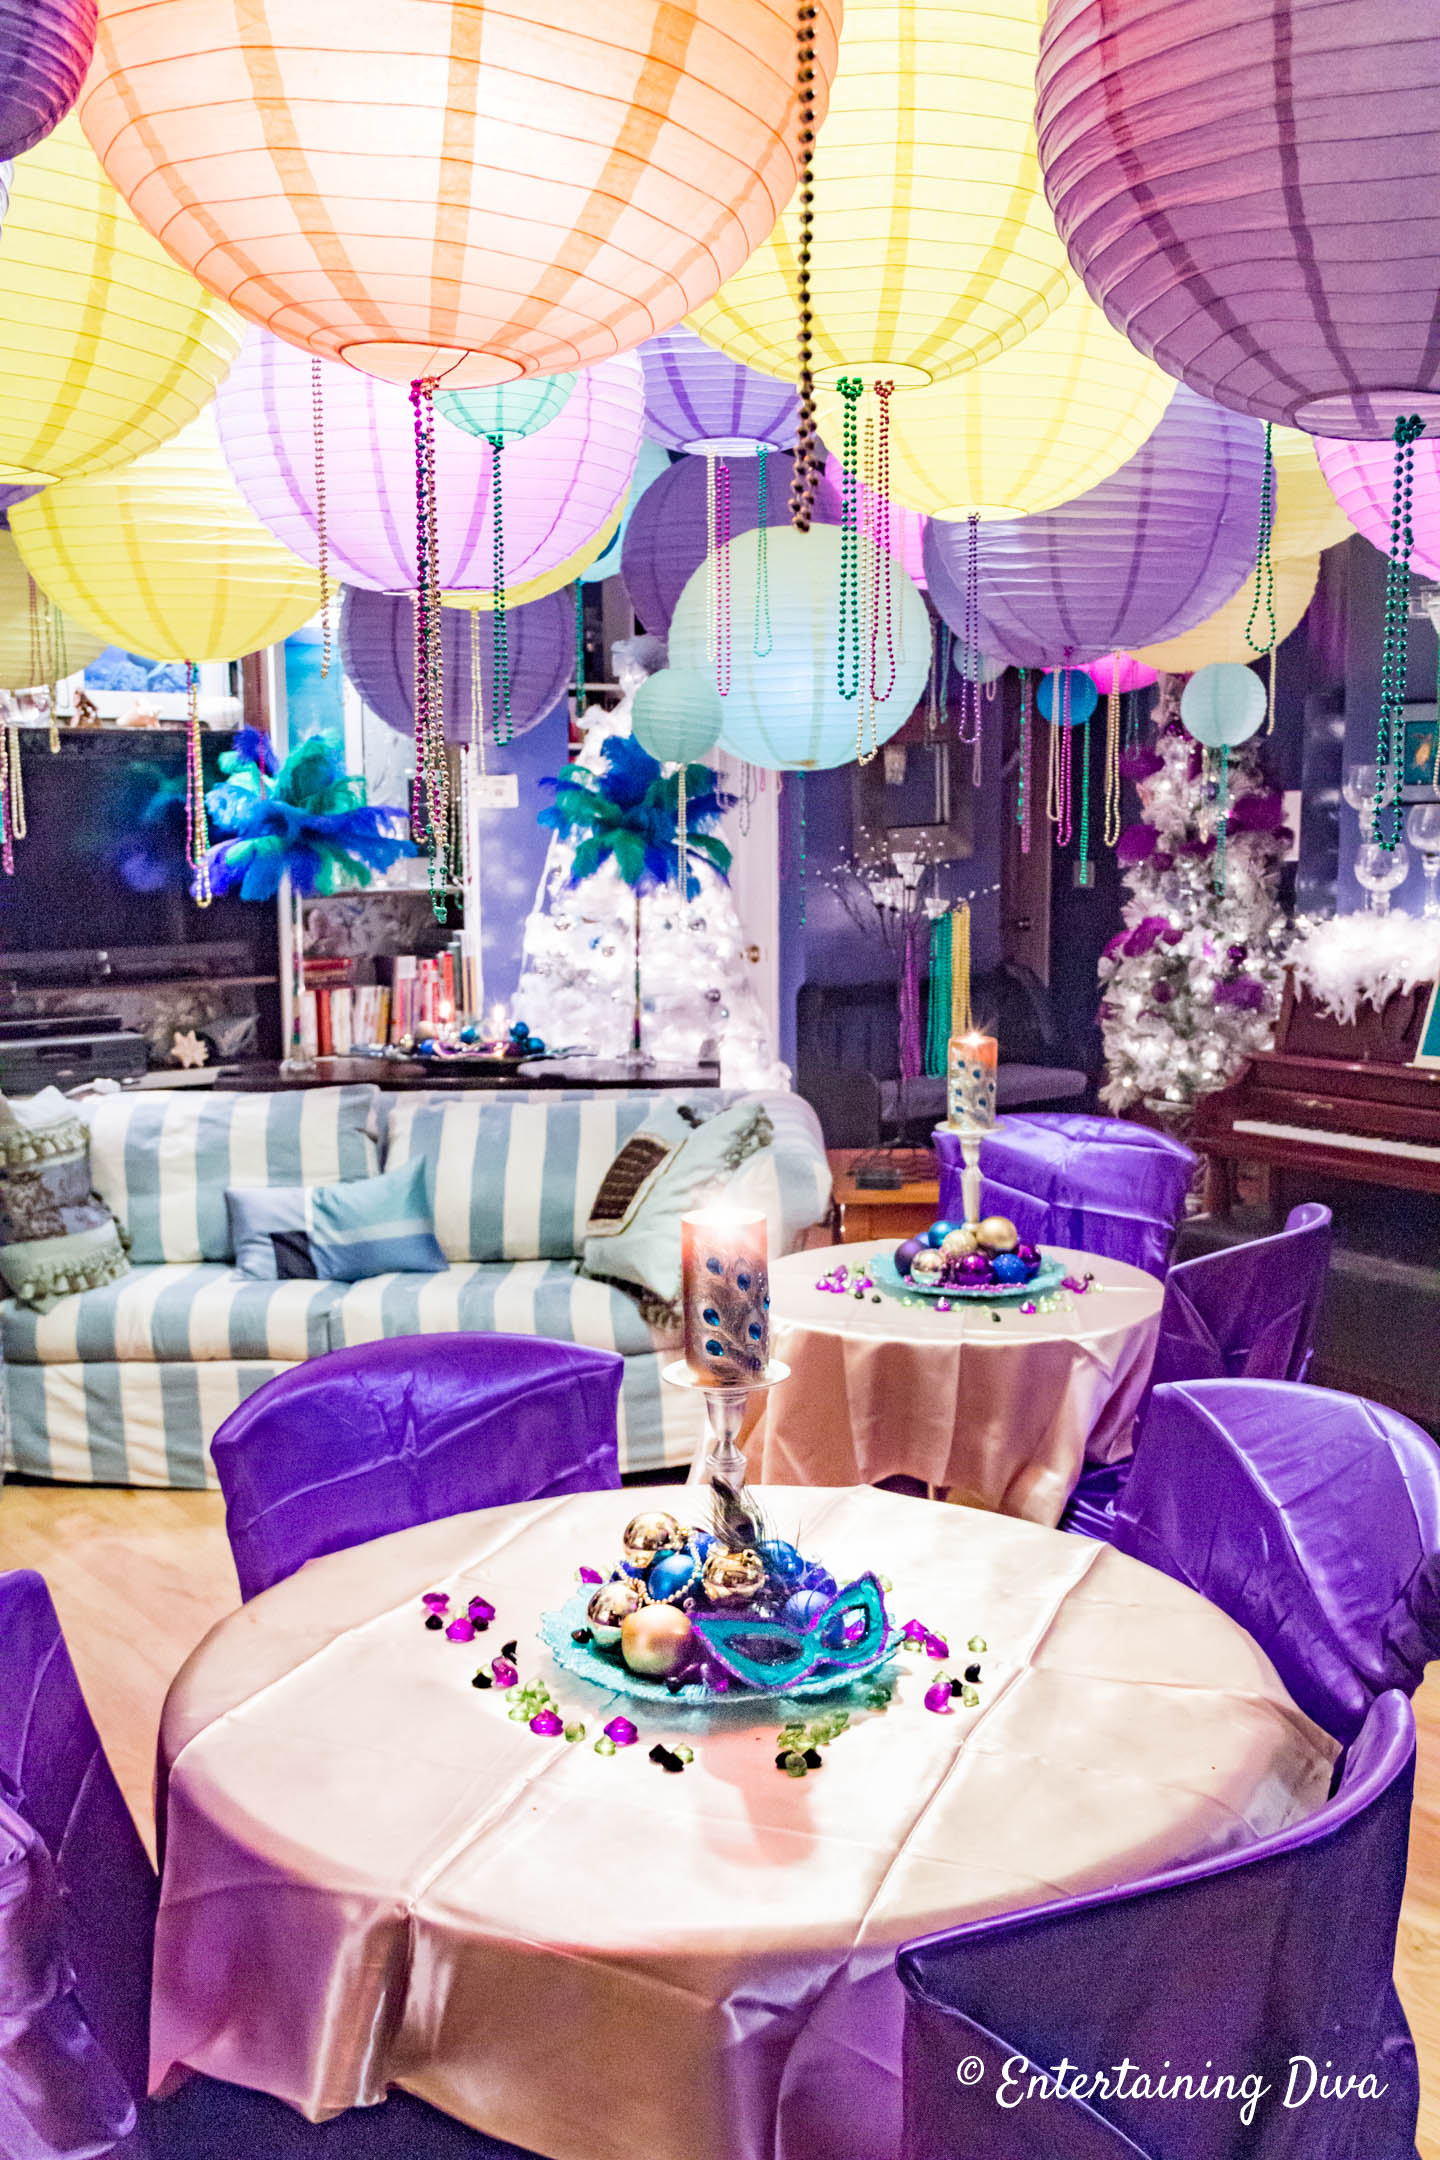 Mardi Gras room decorations with purple chair covers and gold tablecloths